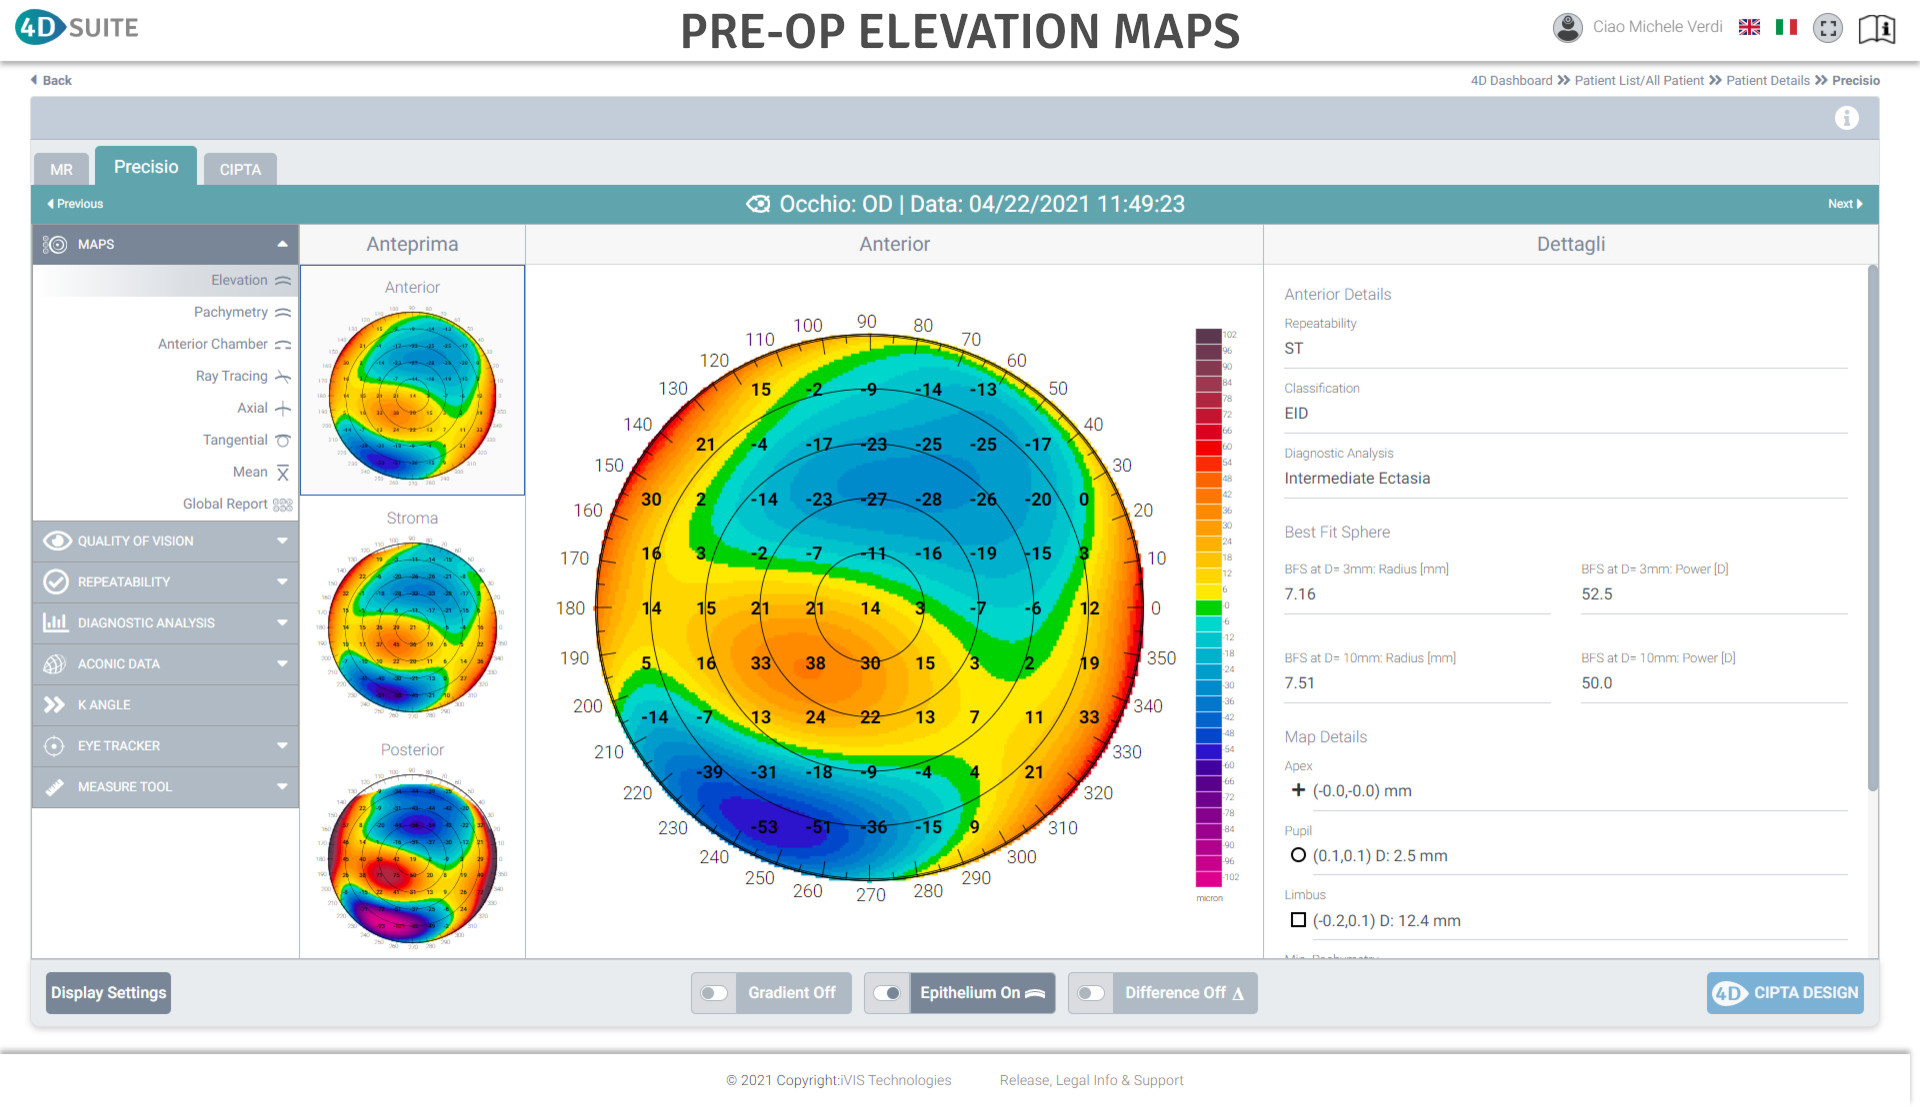 PREOP ELEVATION MAPS